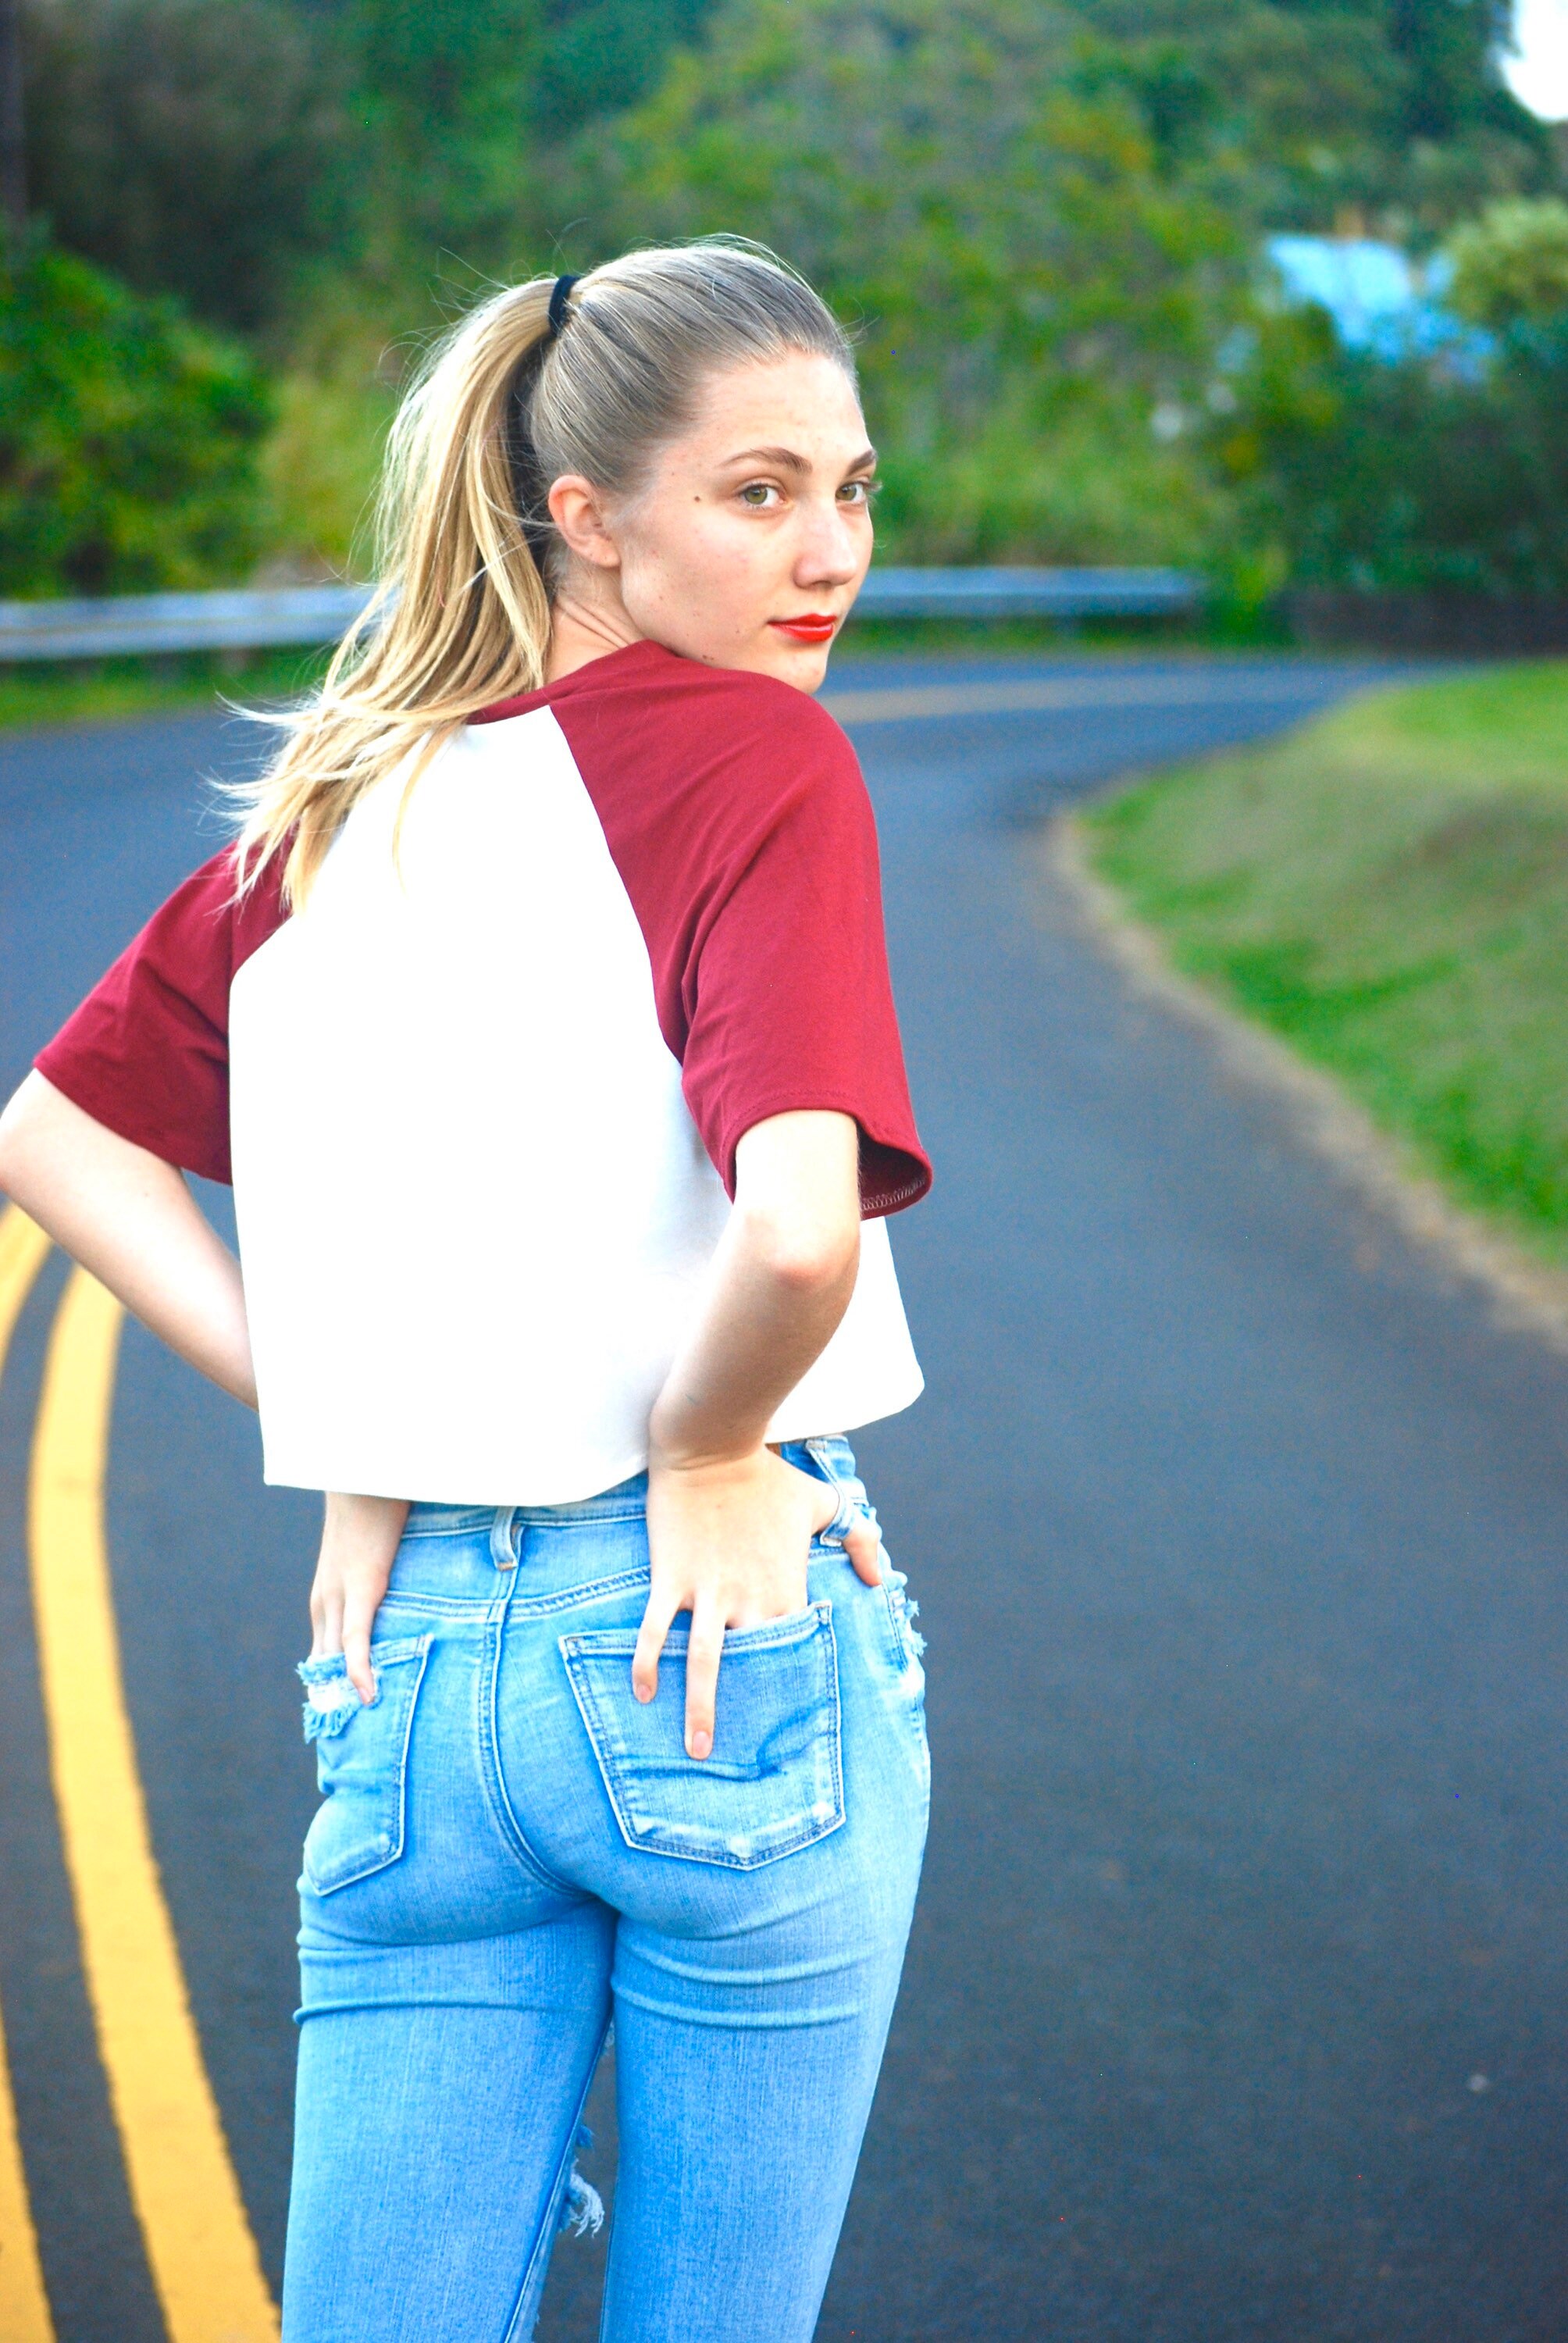 Raglan Sleeve Crop Top Short 15 Sleeve Red Made Etsy Custom Colors Clothing Available - White Organic